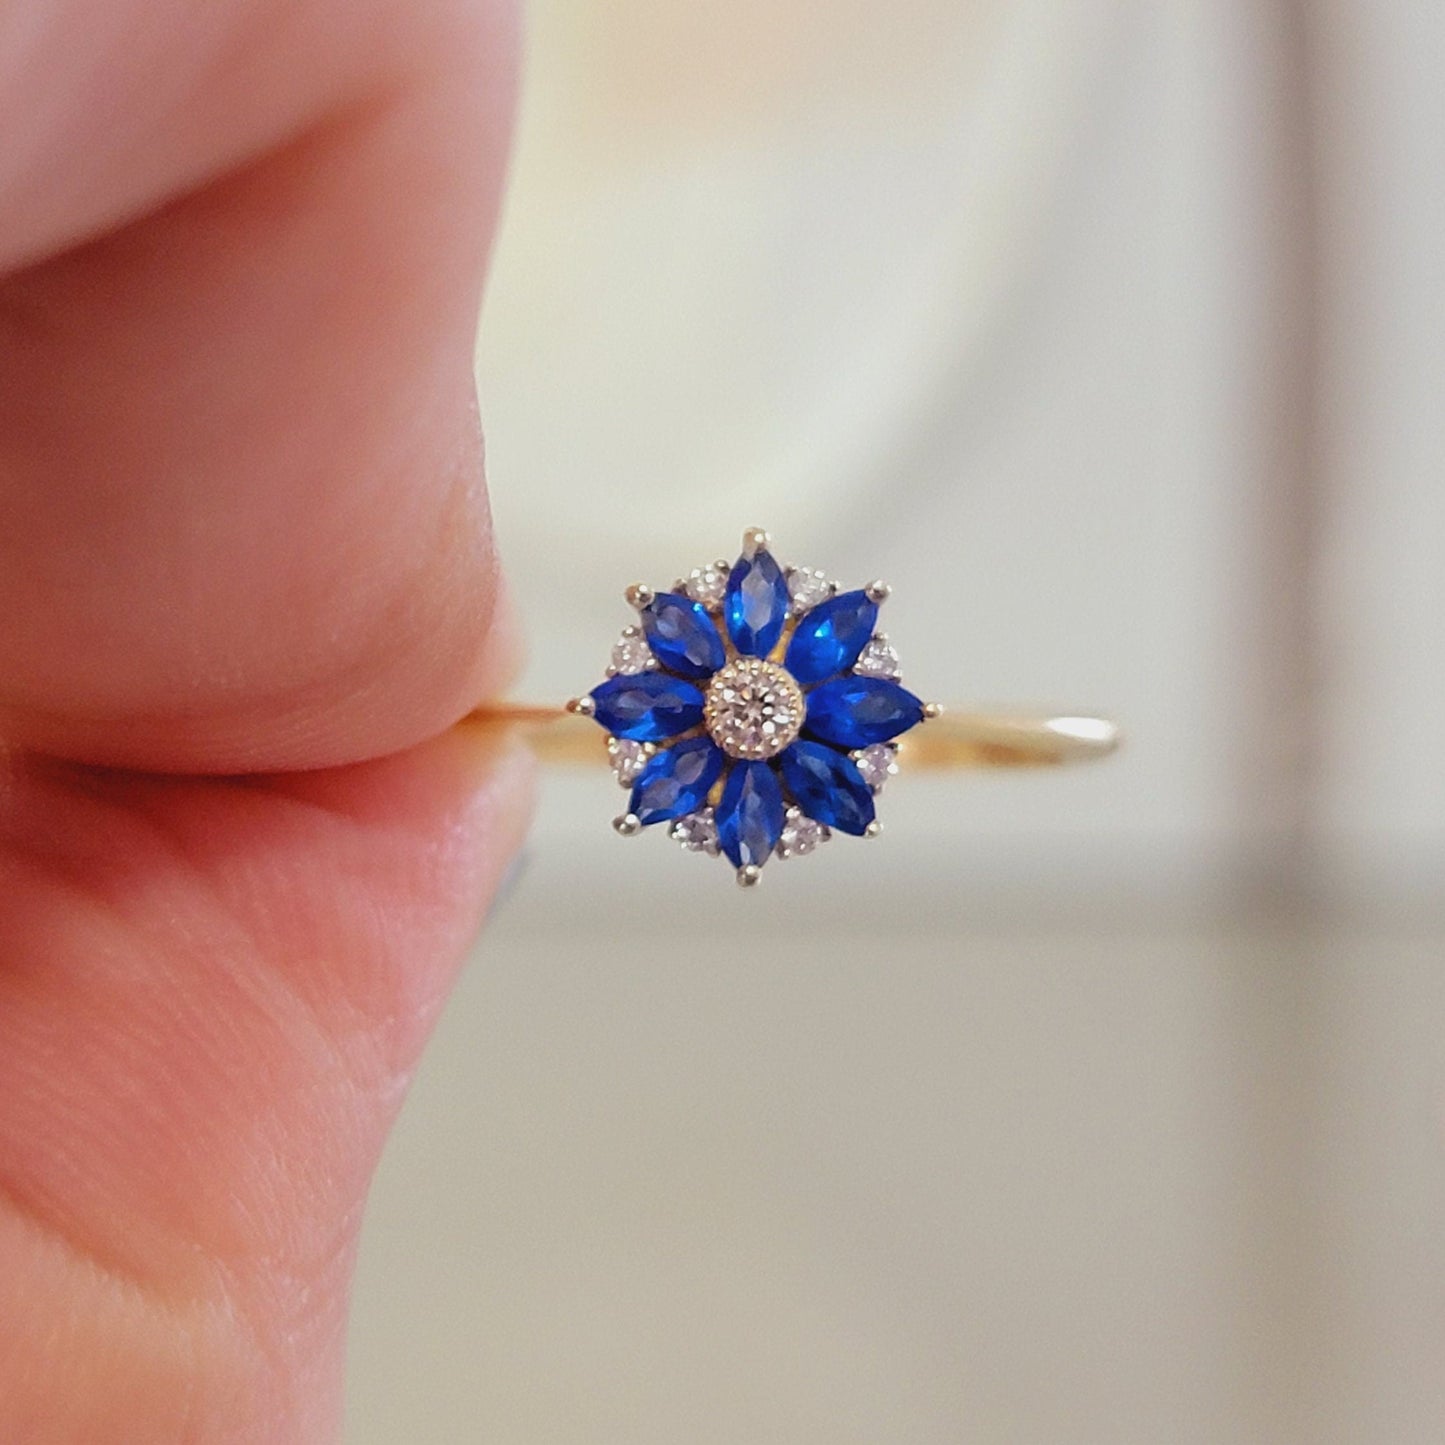 Diamond Halo Cluster Ring in 14k Gold /  Blue Sapphire Cluster Ring Engagement / Diamond Floral Accent Ring / Vintage Sapphire Ring